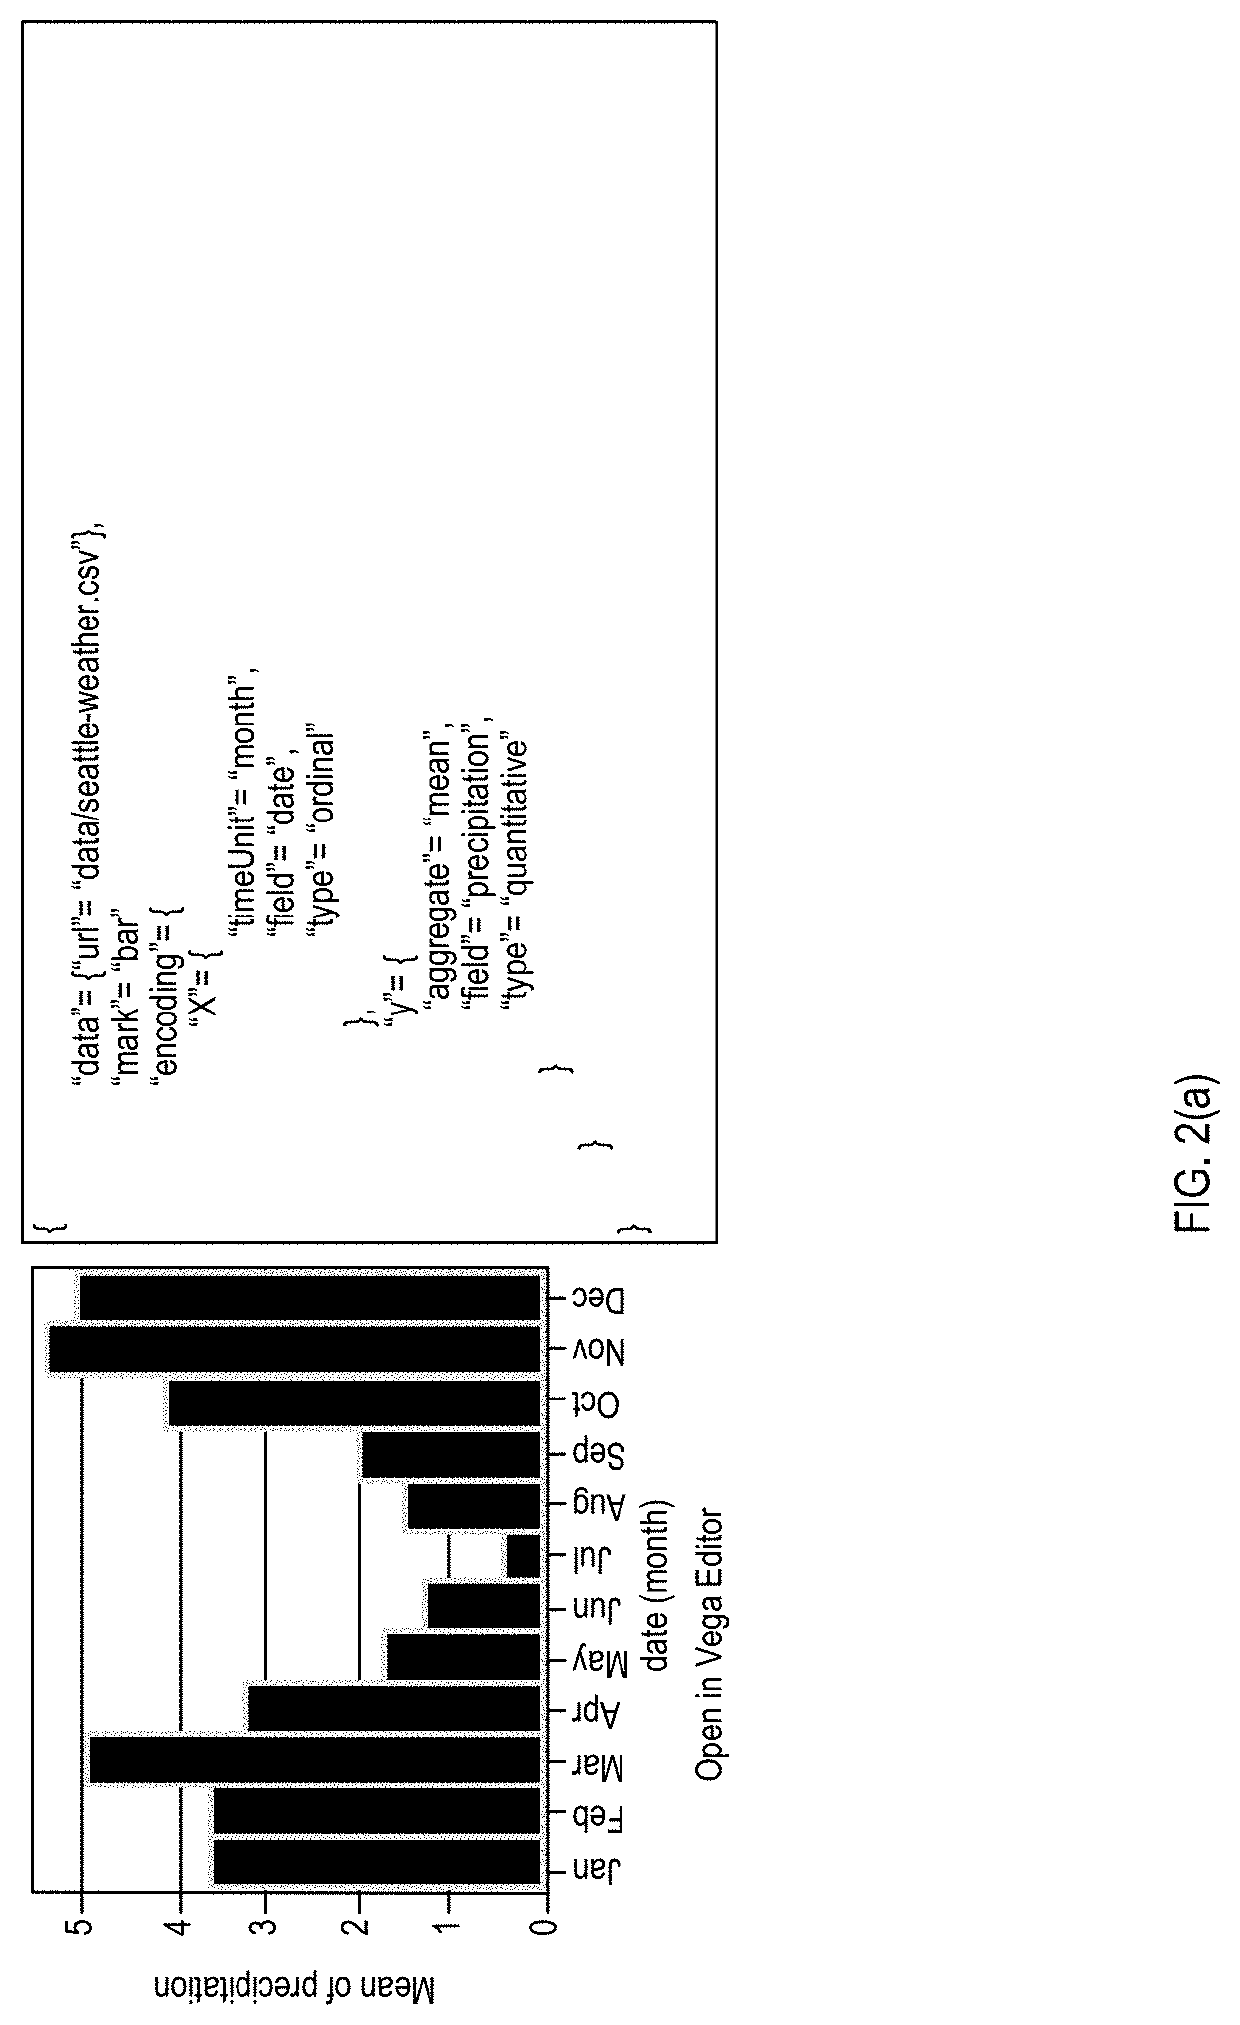 Systems and methods for summarizing and steering multi-user collaborative data analyses